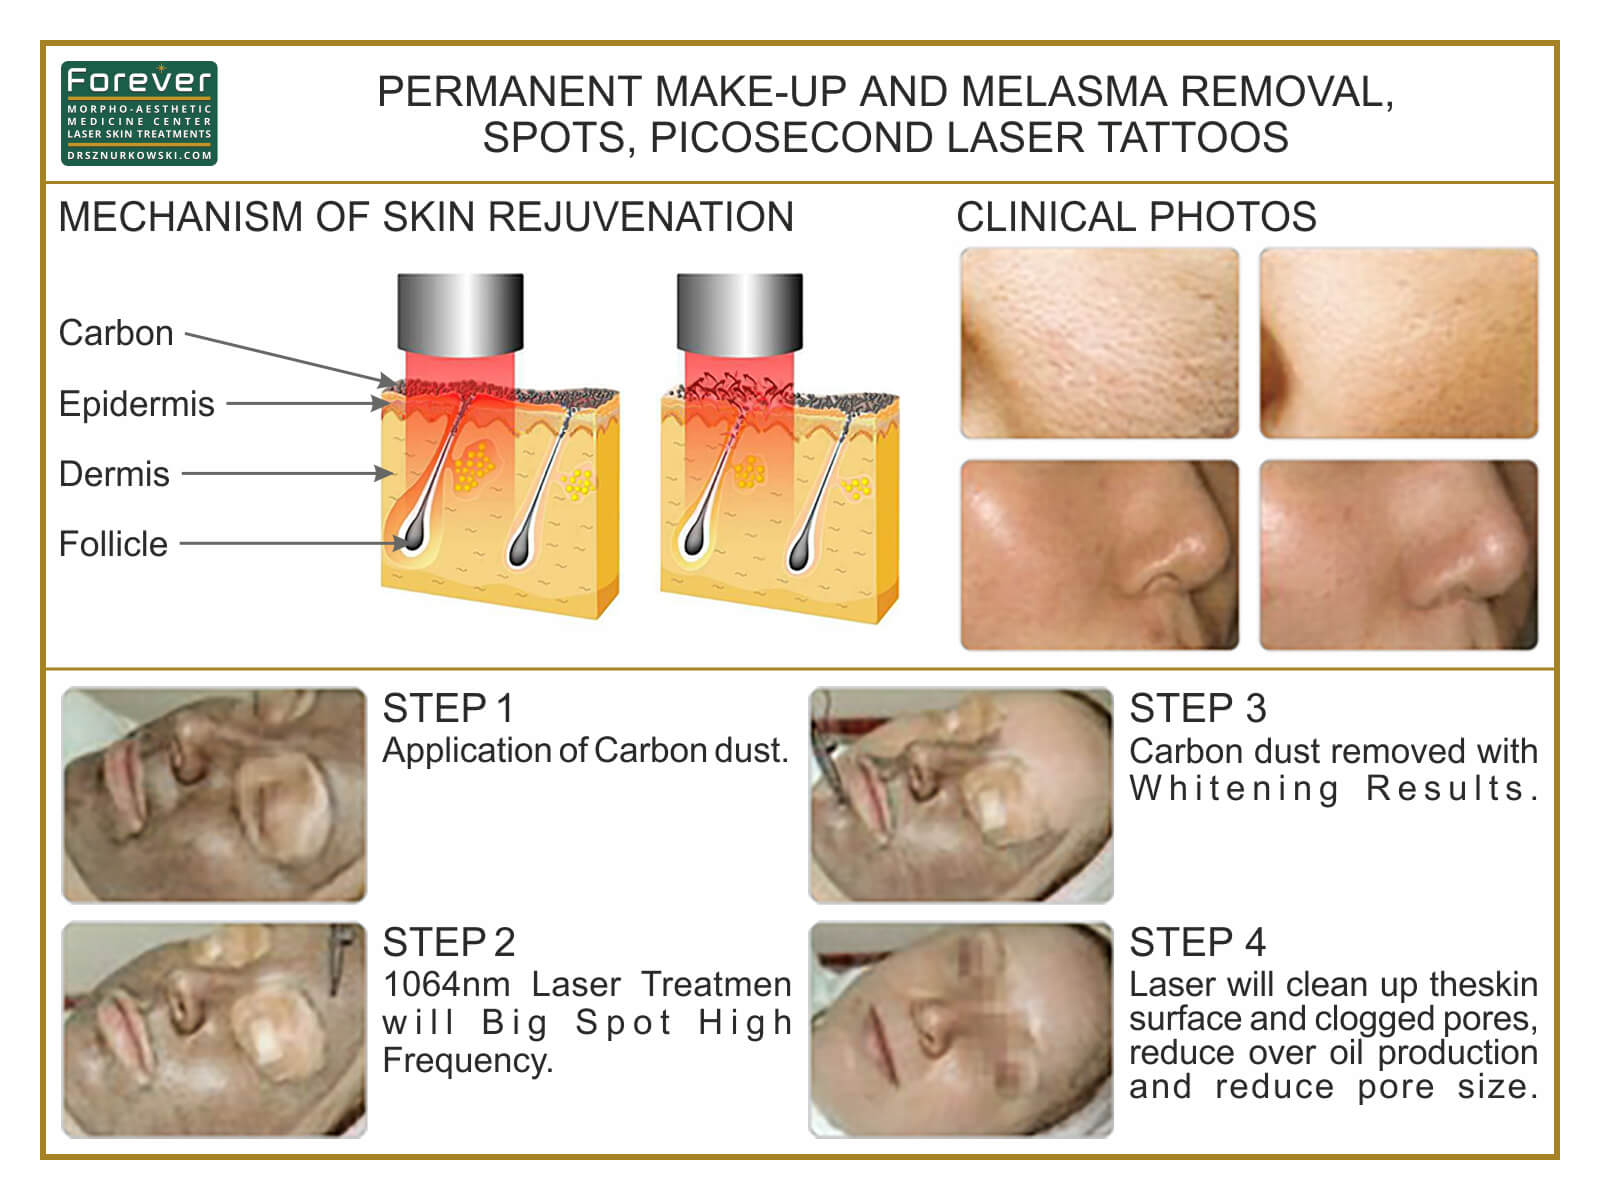 Permanent Make-up And Melasma Removal, Spots, Picosecond... (80x60) EN.jpg